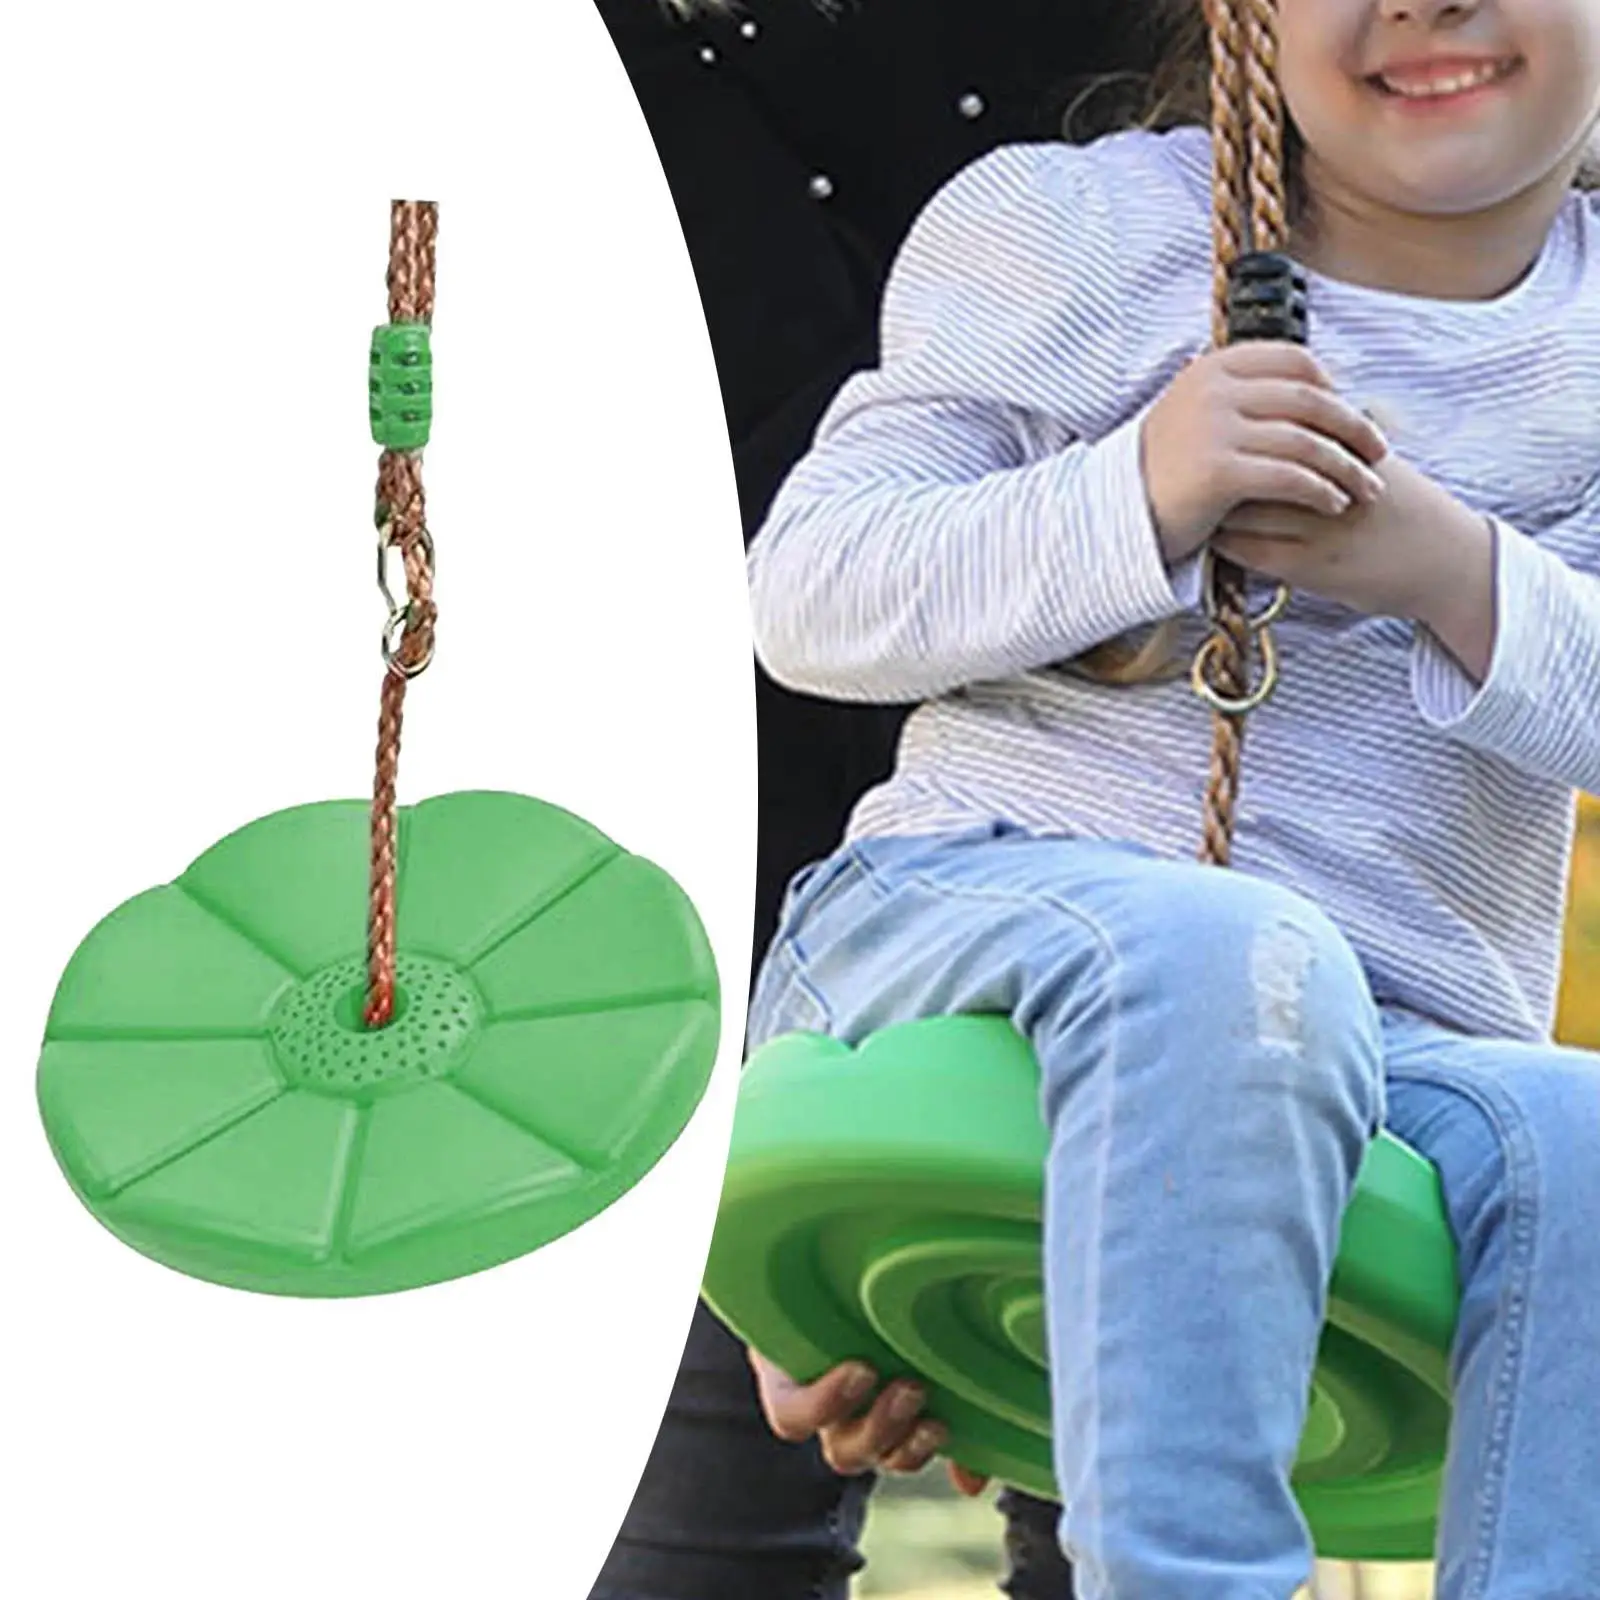 Climbing Rope  Loading 150kg  platforms Kids Disc Swings Seat for Playset Tree House Daily Exercise Outdoor Playground